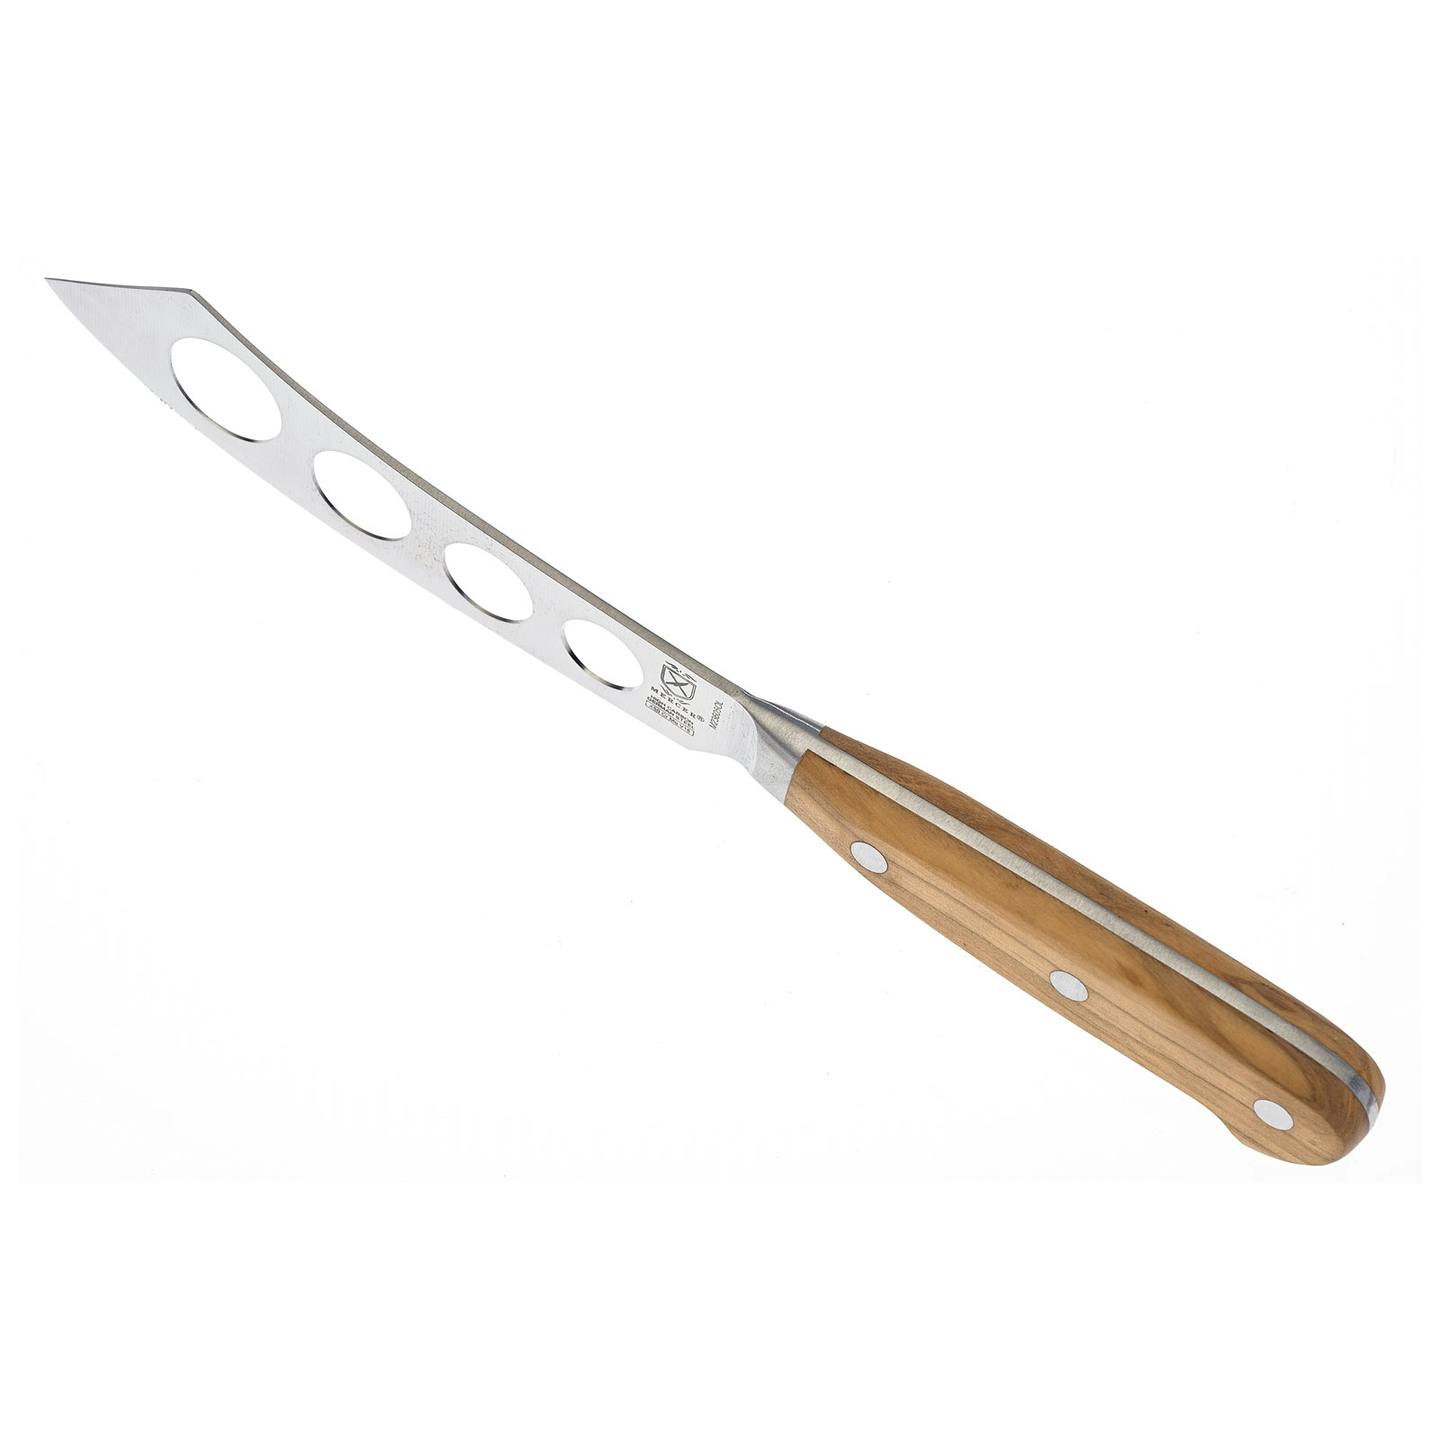 Mercer Culinary Renaissance 5" Soft Cheese Knife, Olive Wood Handle